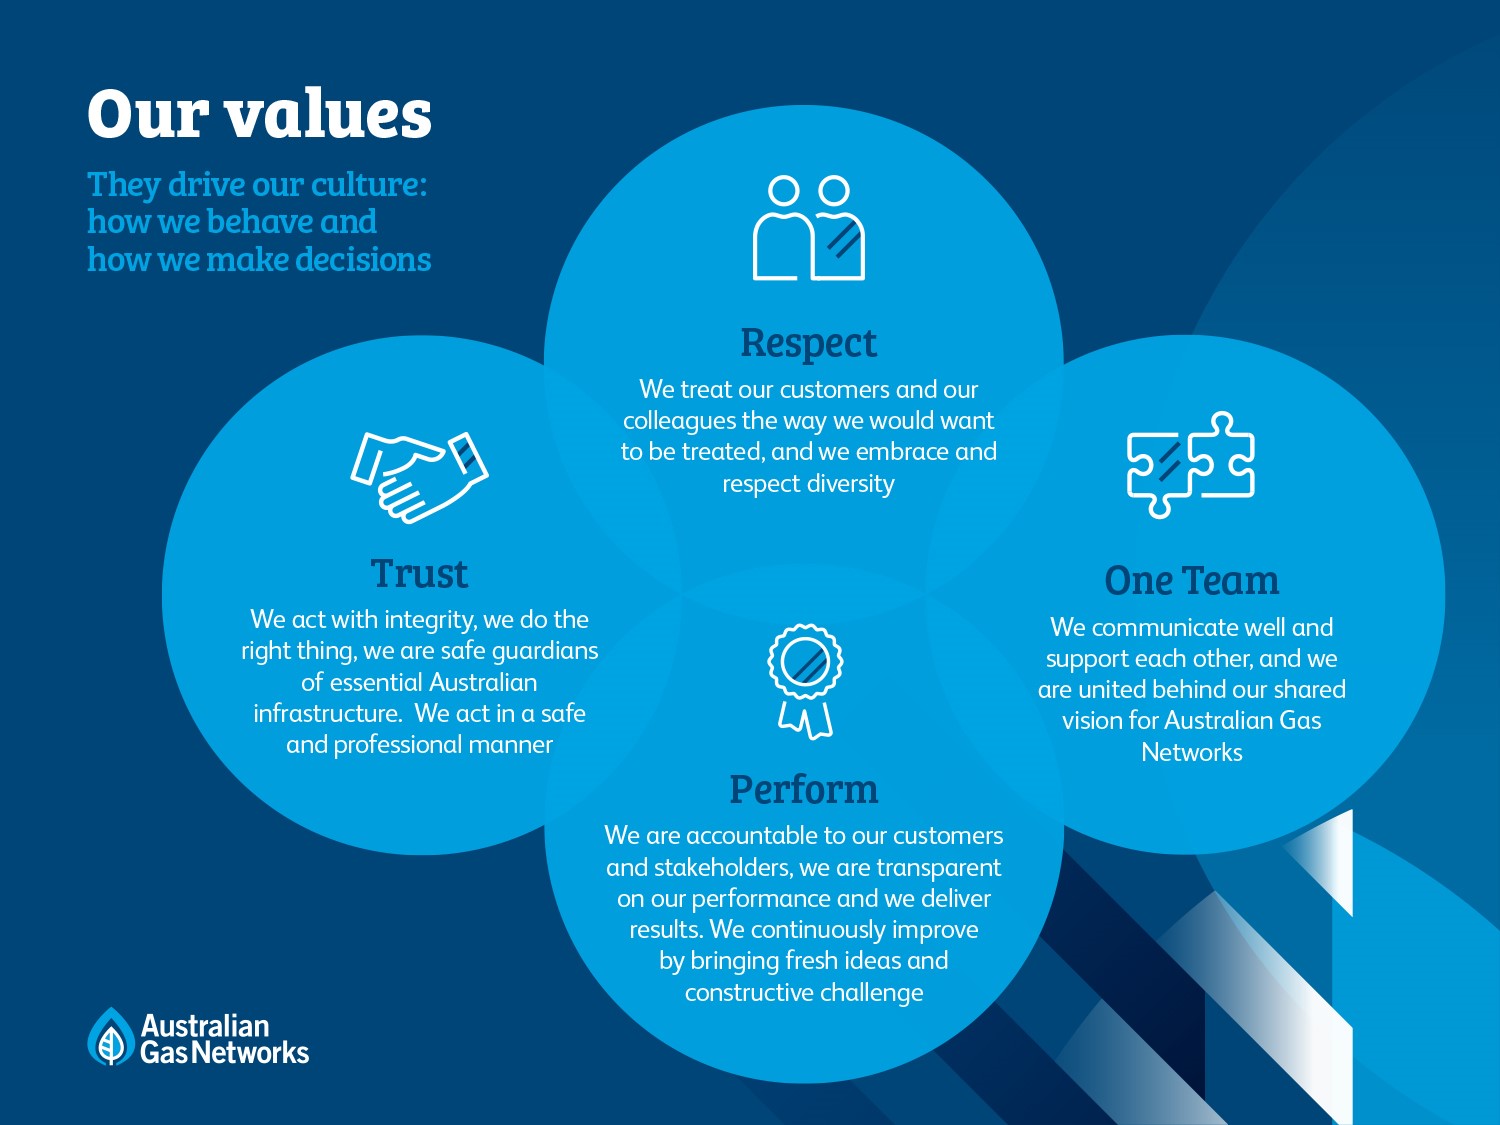 Our values: trust, respect, one team, perform